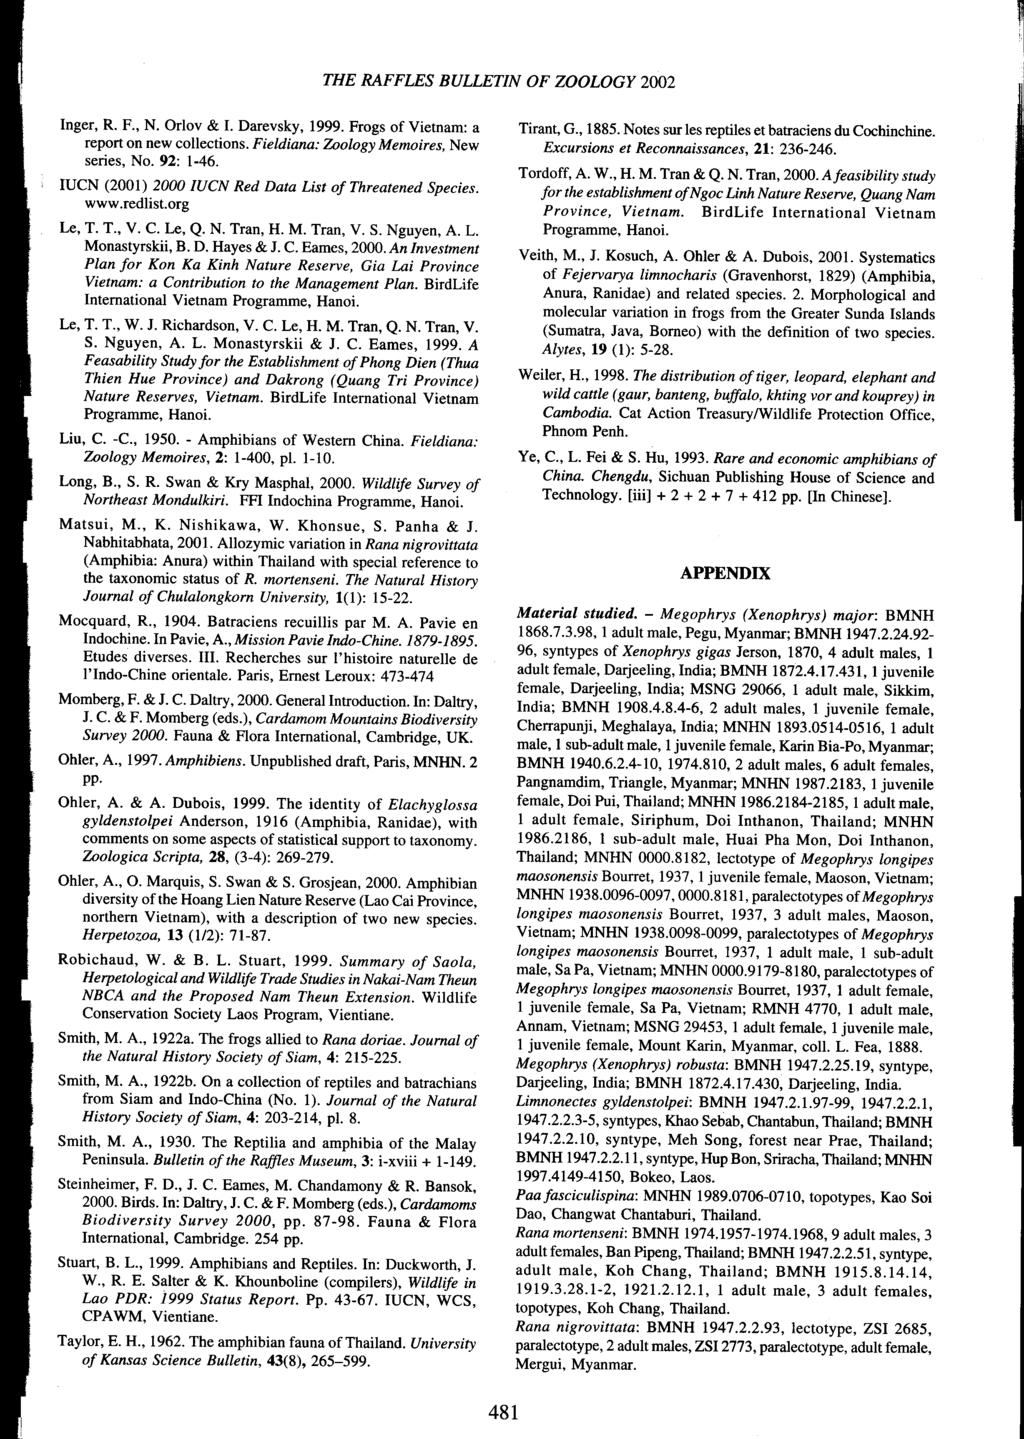 Inger, R. F., N. Orlov & I. Darevsky, 1999. Frogs of Vietnam: a report on new collections. Fieldiana: Zoology Memoires, New series, No. 92: 1-46. THE RAFFLES BULLETIN OF ZOOLOGY 2002 Tirant, G., 1885.